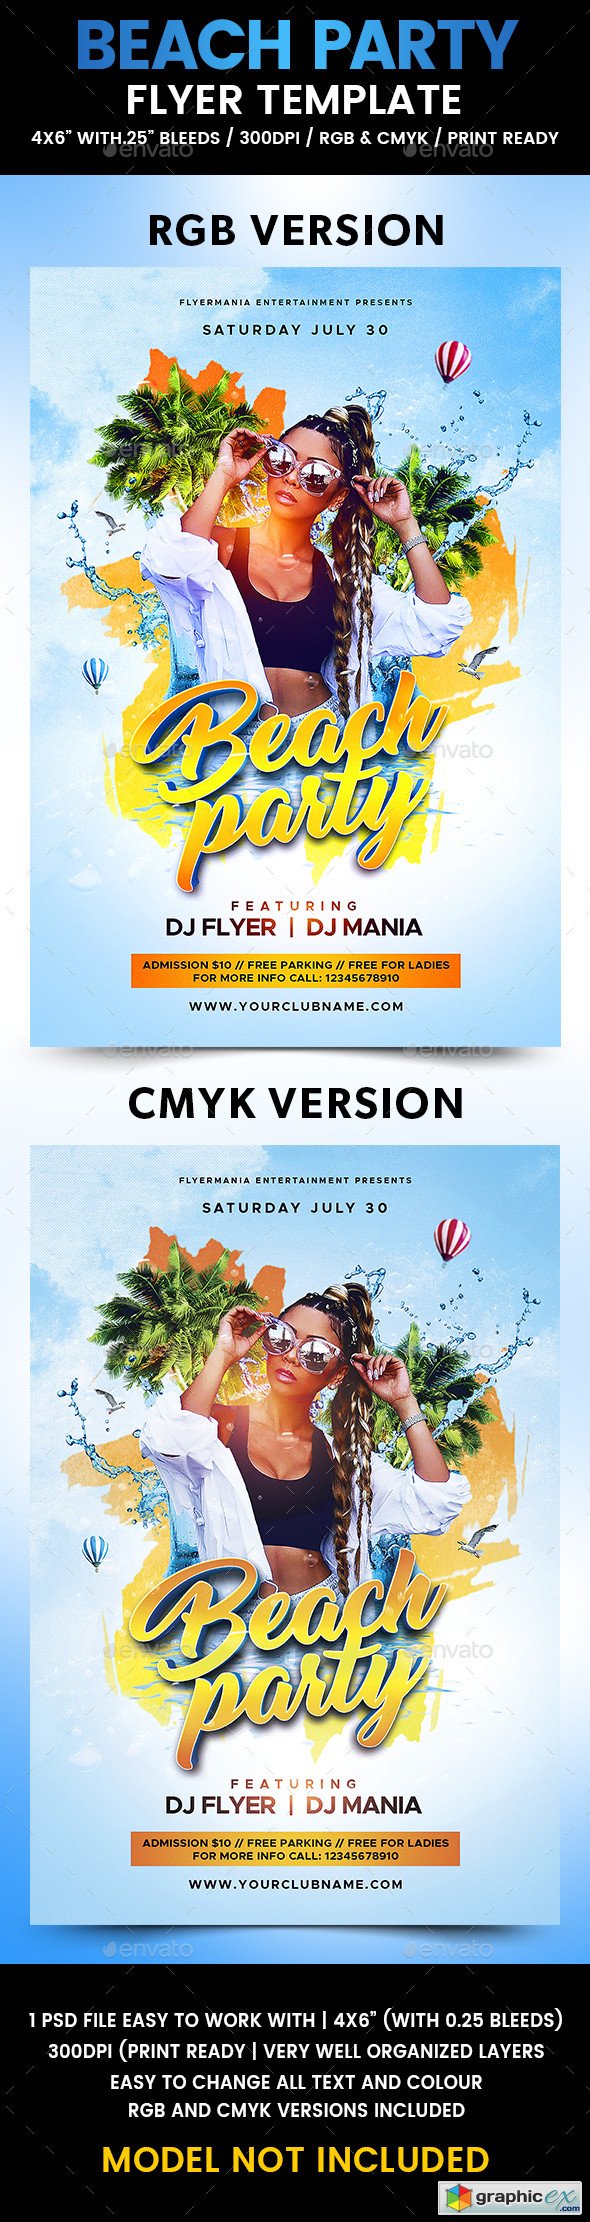 Beach Party Flyer Template 20295044